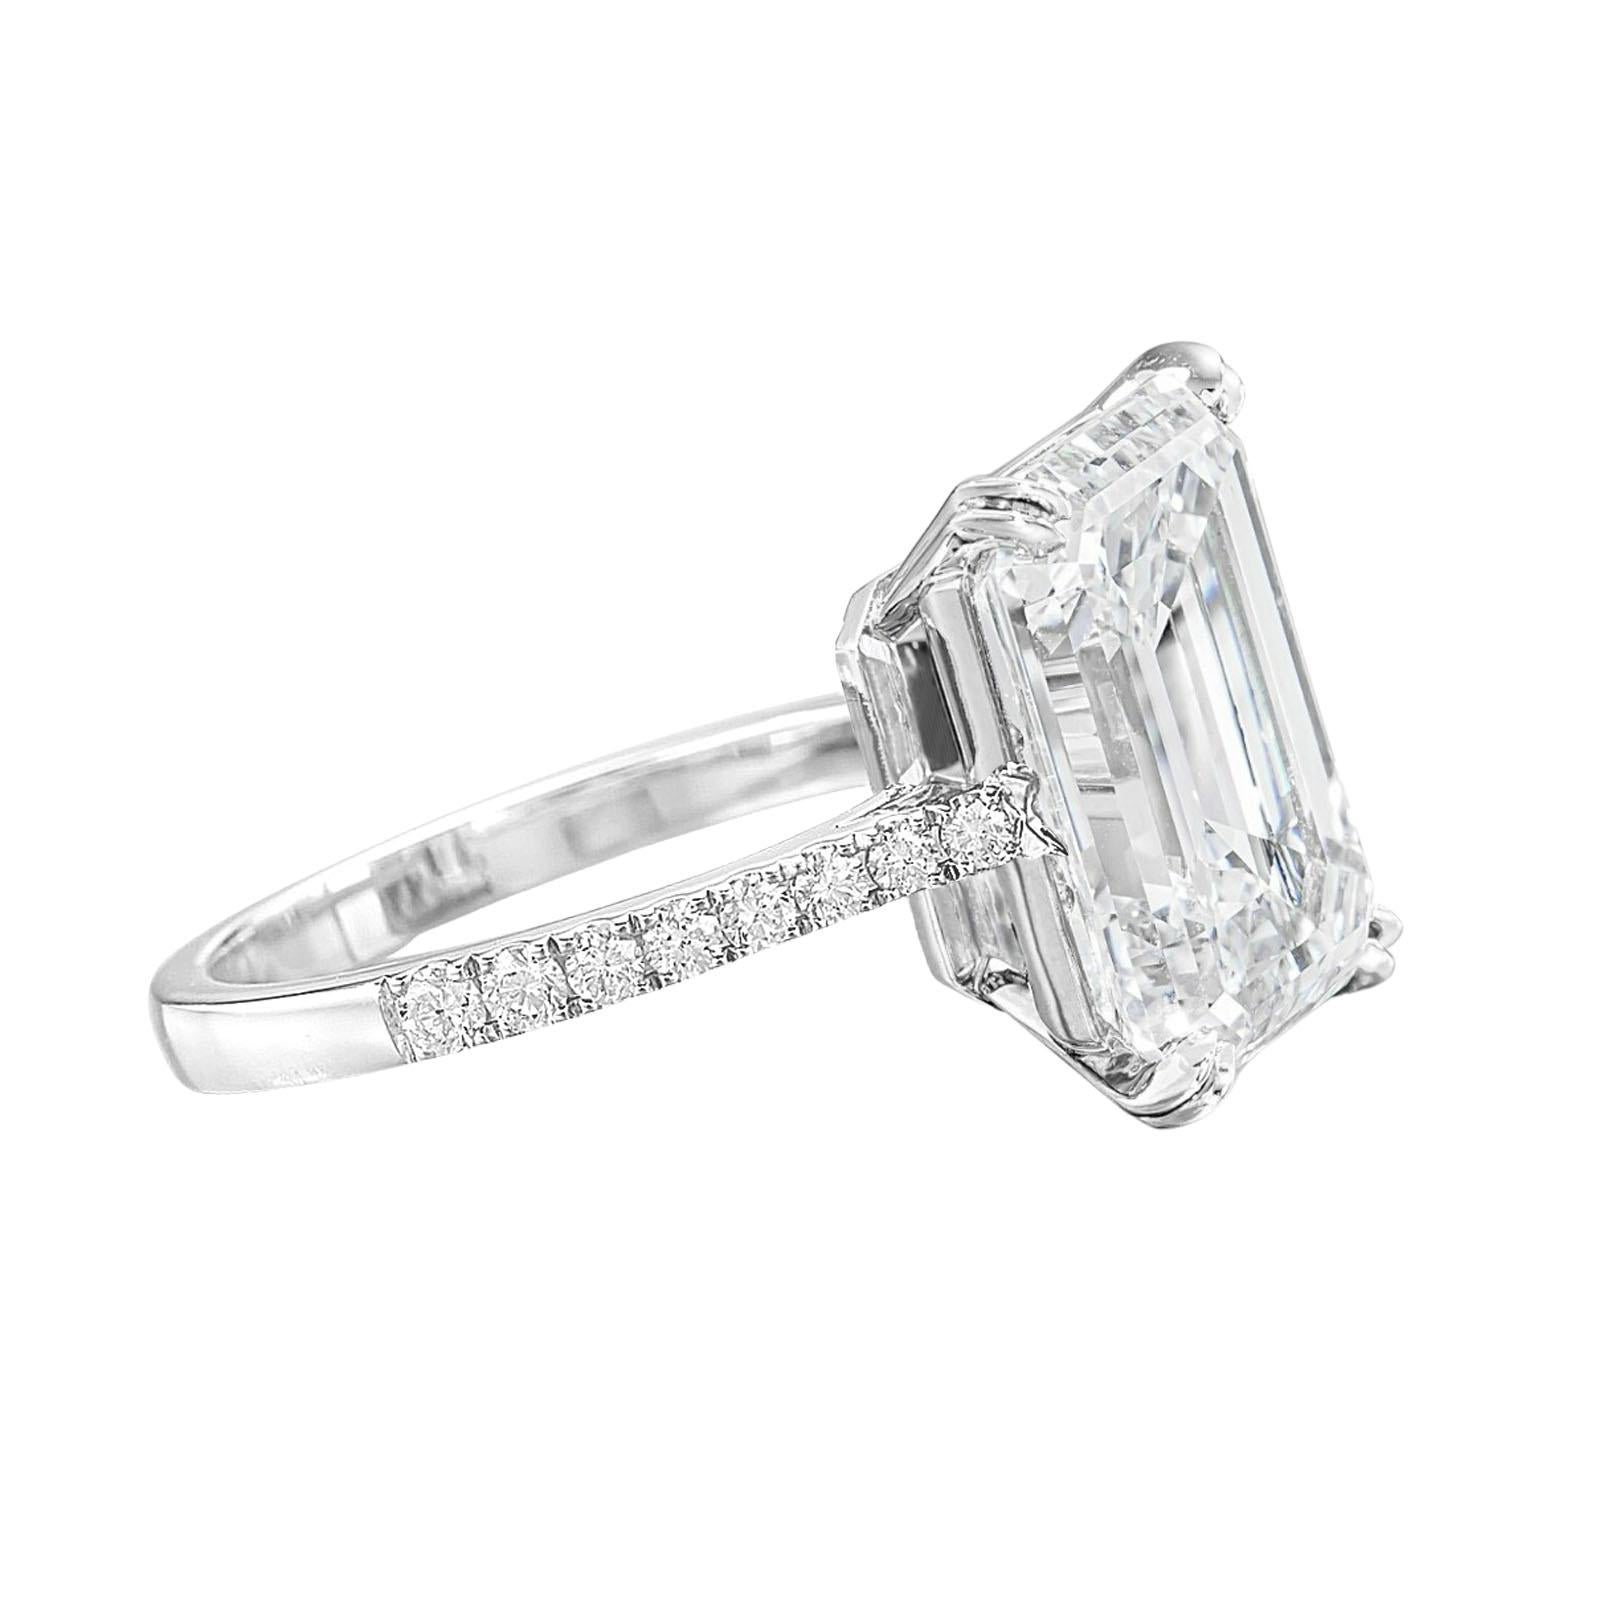 An exquisite 5 carat D Color Flawless Clarity emerald cut diamond certified by GIA

An investment grade diamond set with micropave diamonds in the band 

set in solid platinum
